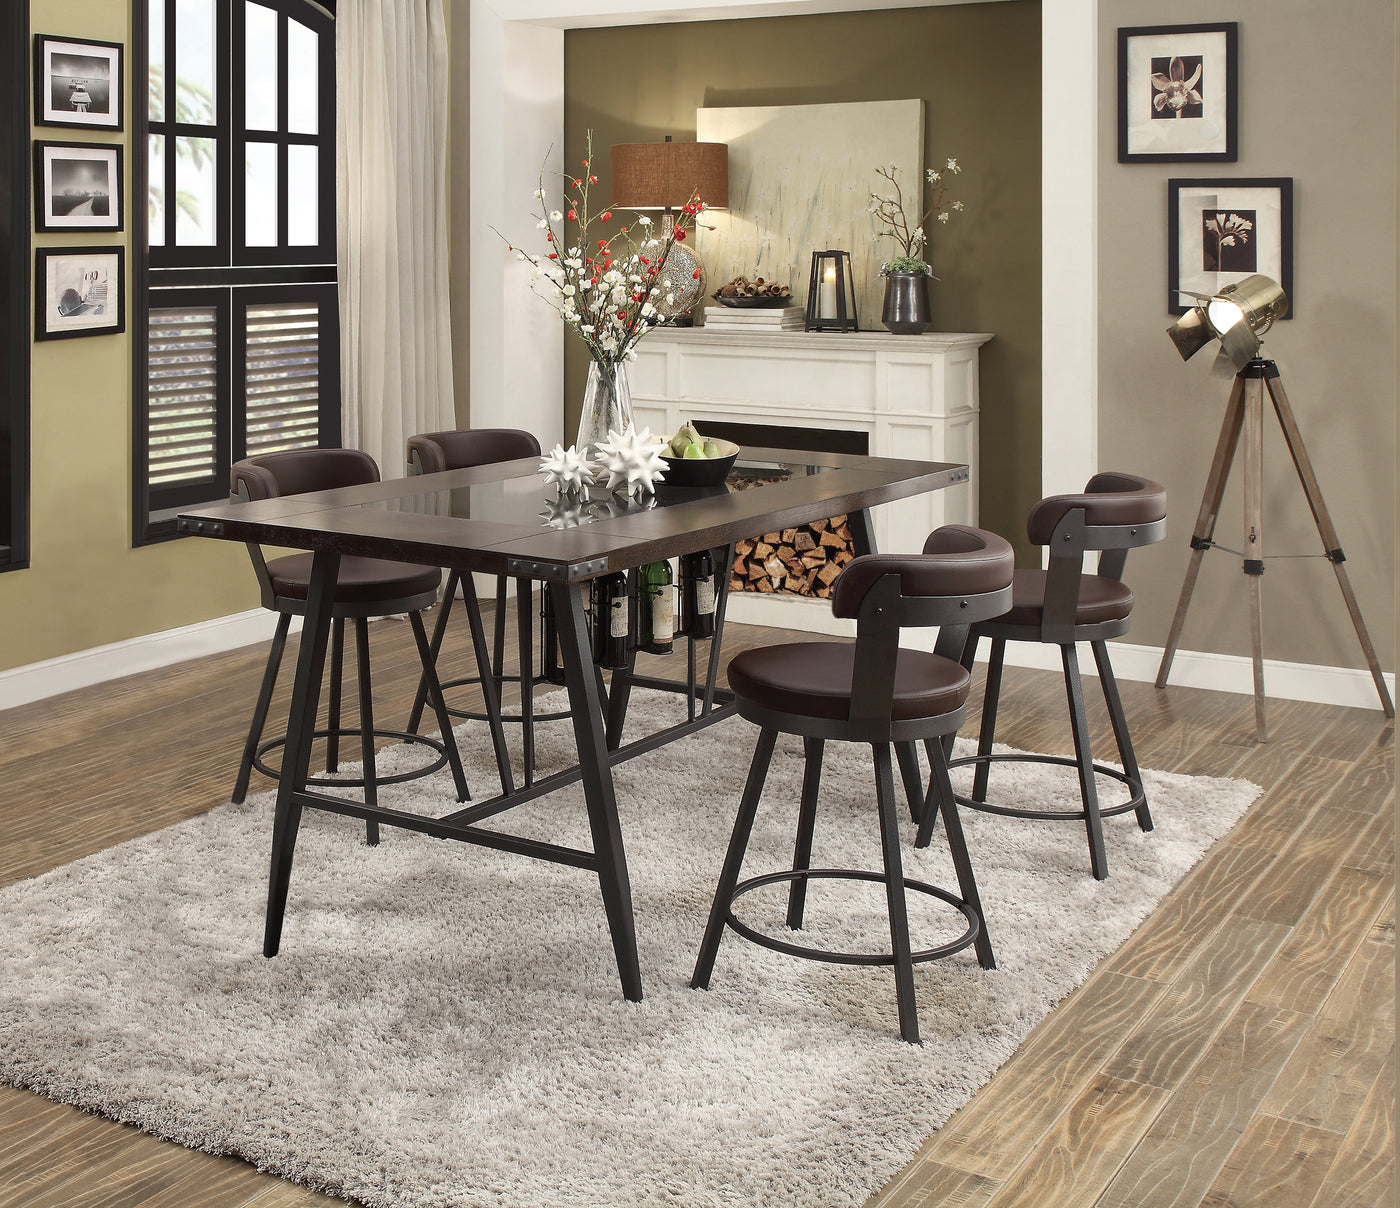 Drai Counter Height Stool - Brown